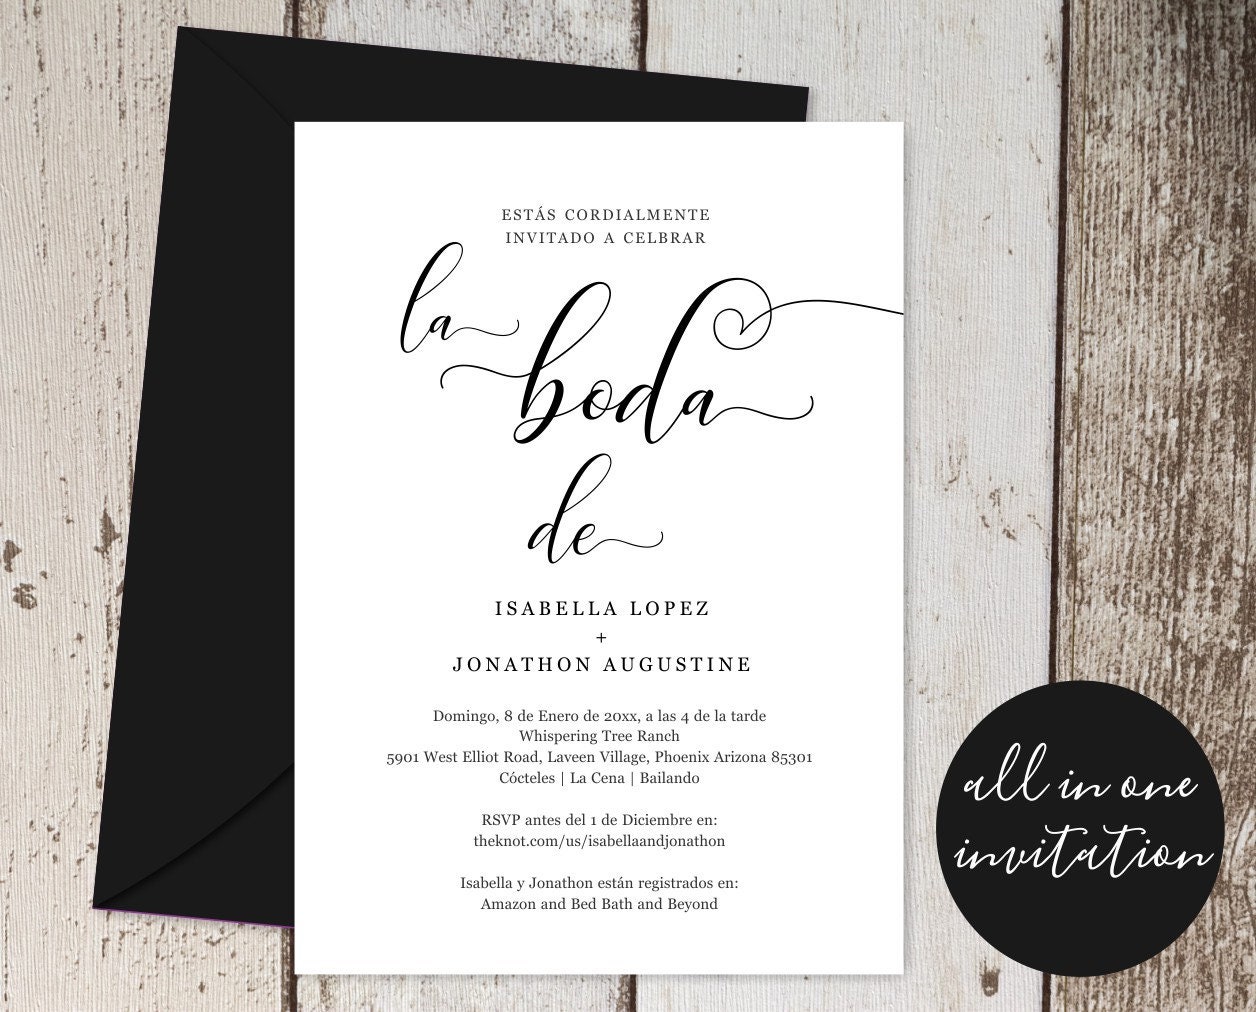 Spanish Wedding Invitation All in One w- RSVP and Registry, Printable Seal & Send Template